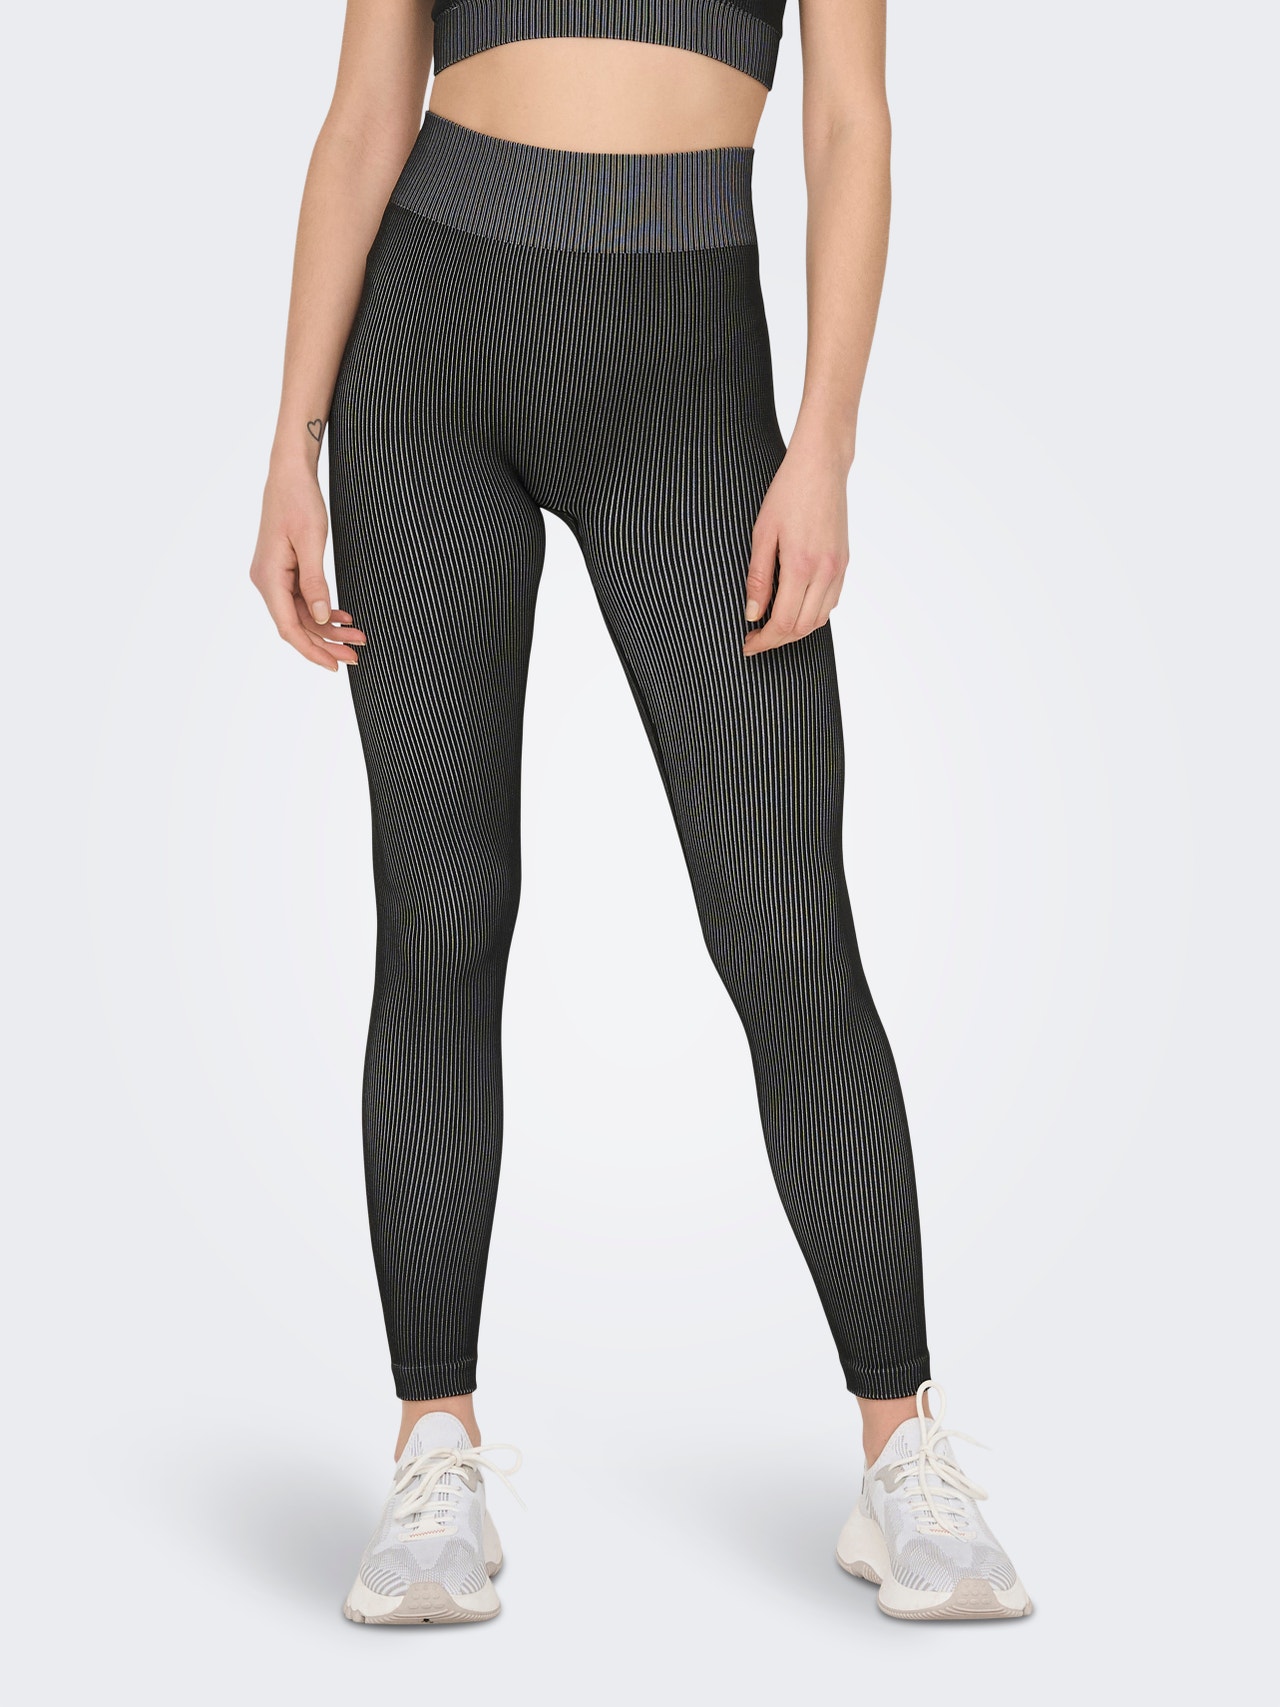 ONLY Leggings Tight Fit -Black - 15274236